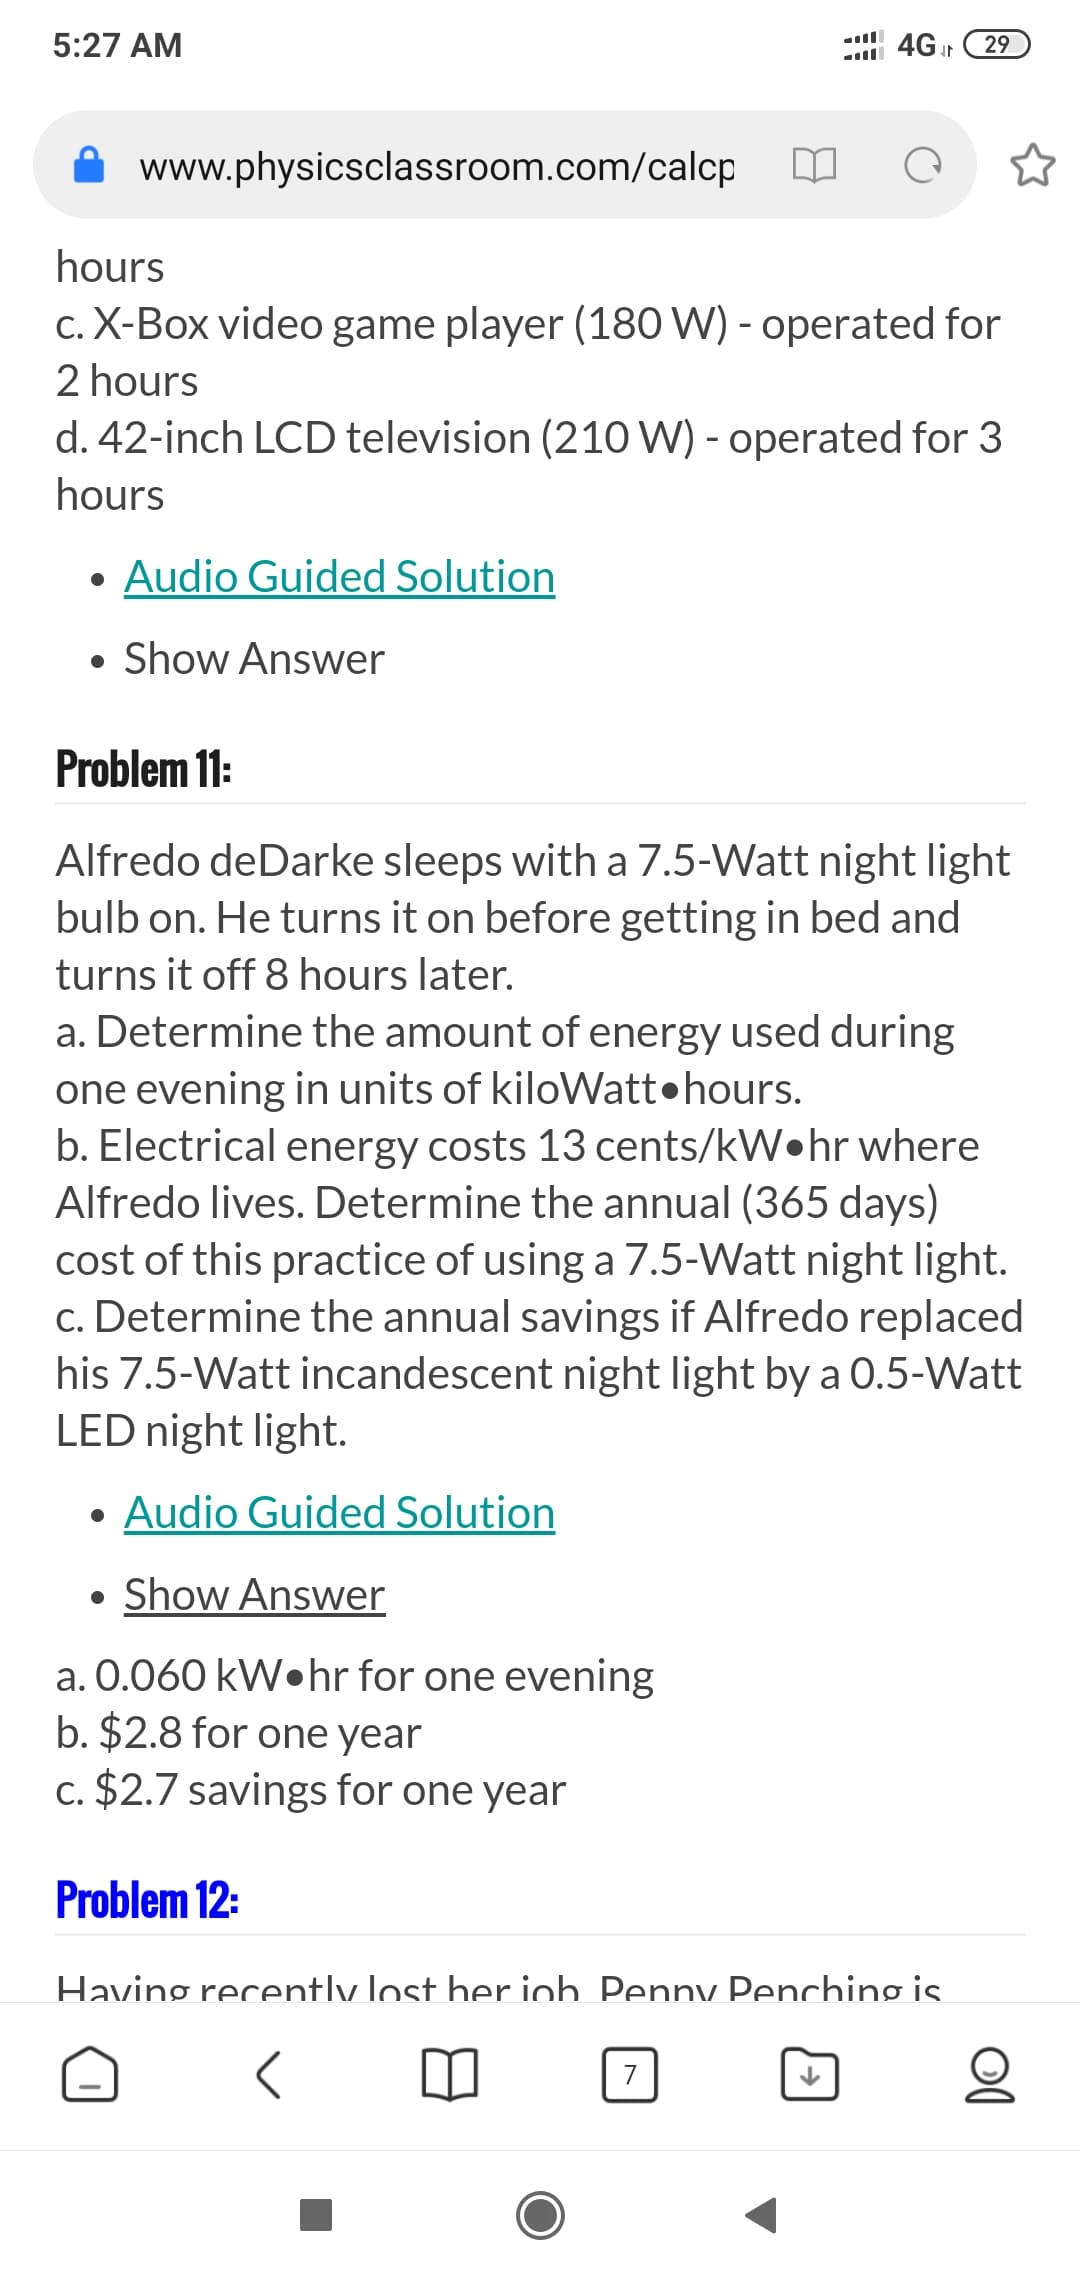 Alfredo deDarke sleeps with a 7.5-Watt night light
bulb on. He turns it on before getting in bed and
turns it off 8 hours later.
a. Determine the amount of energy used during
one evening in units of kiloWatt•hours.
b. Electrical energy costs 13 cents/kW•hr where
Alfredo lives. Determine the annual (365 days)
cost of this practice of using a 7.5-Watt night light.
c. Determine the annual savings if Alfredo replaced
his 7.5-Watt incandescent night light by a 0.5-Watt
LED night light.
